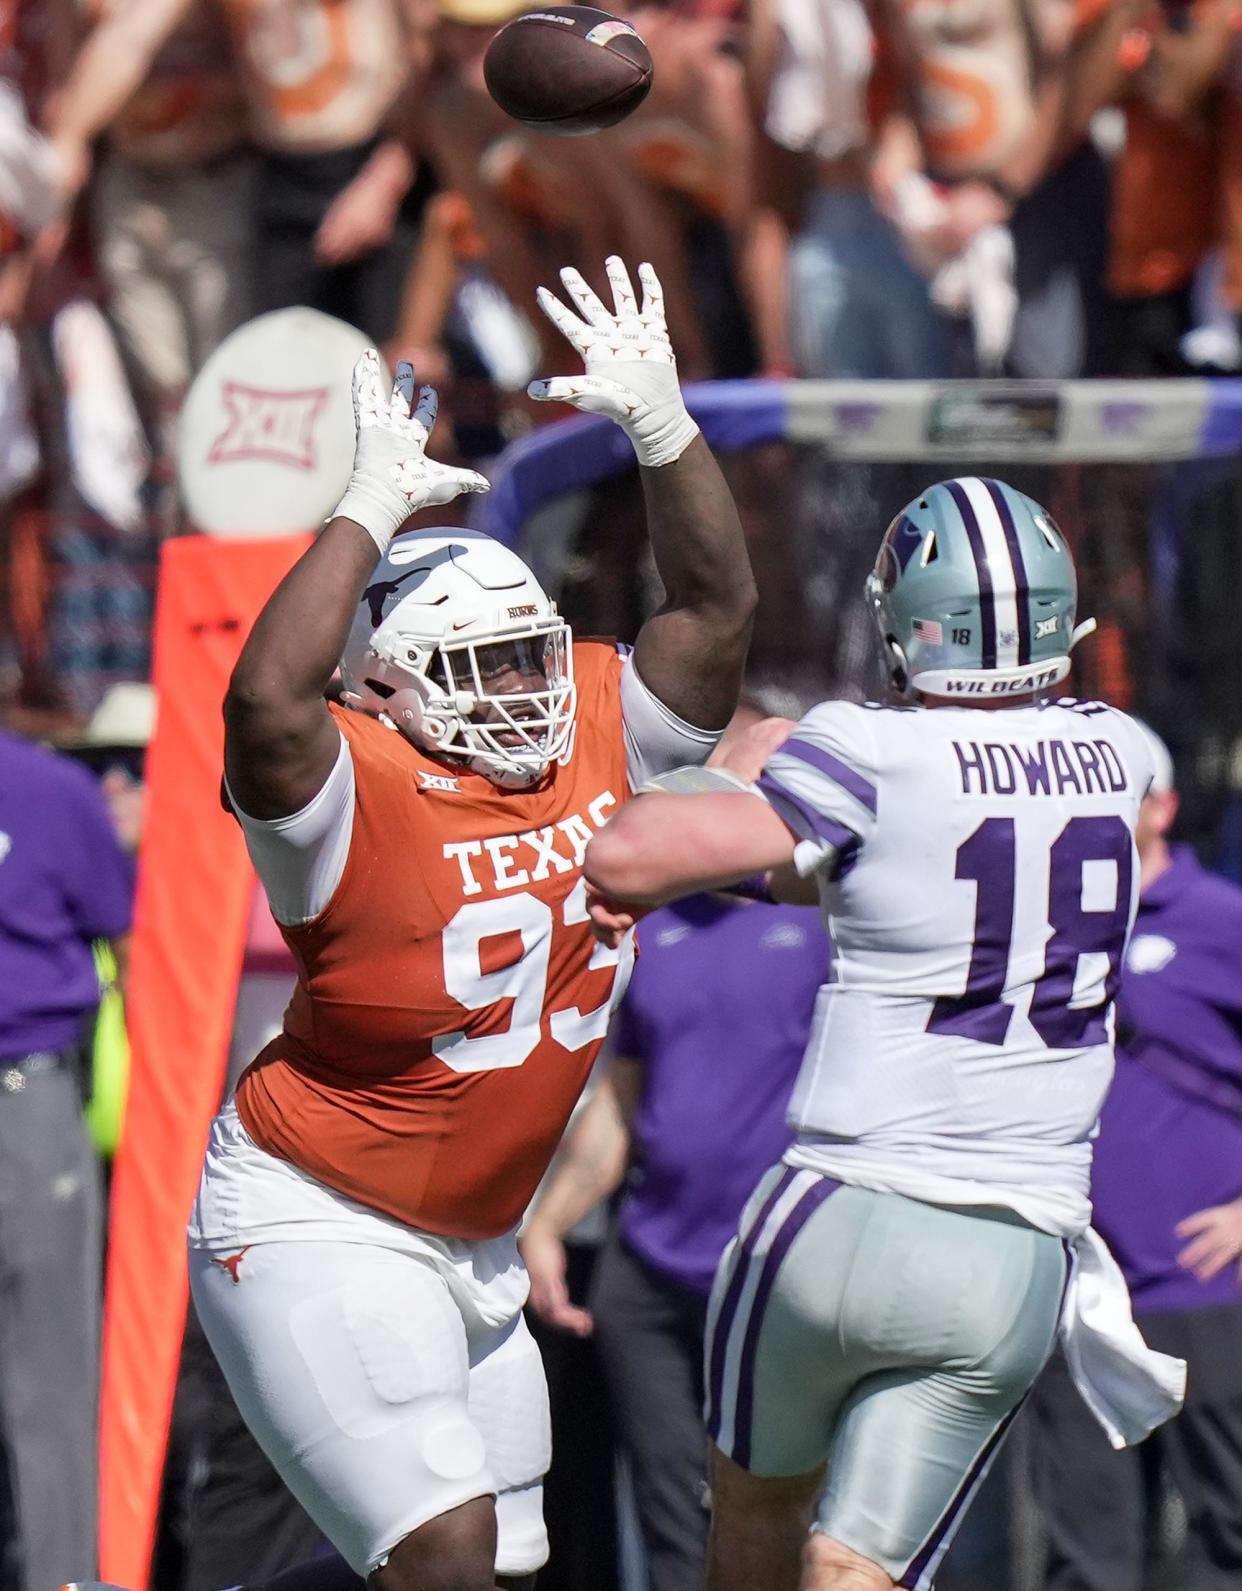 Texas defensive linemen T'Vondre Sweat and Byron Murphy II may be the second coming of Shaun Rogers and Casey Hampton for the Longhorns, who are getting solid play on the interior line this year.